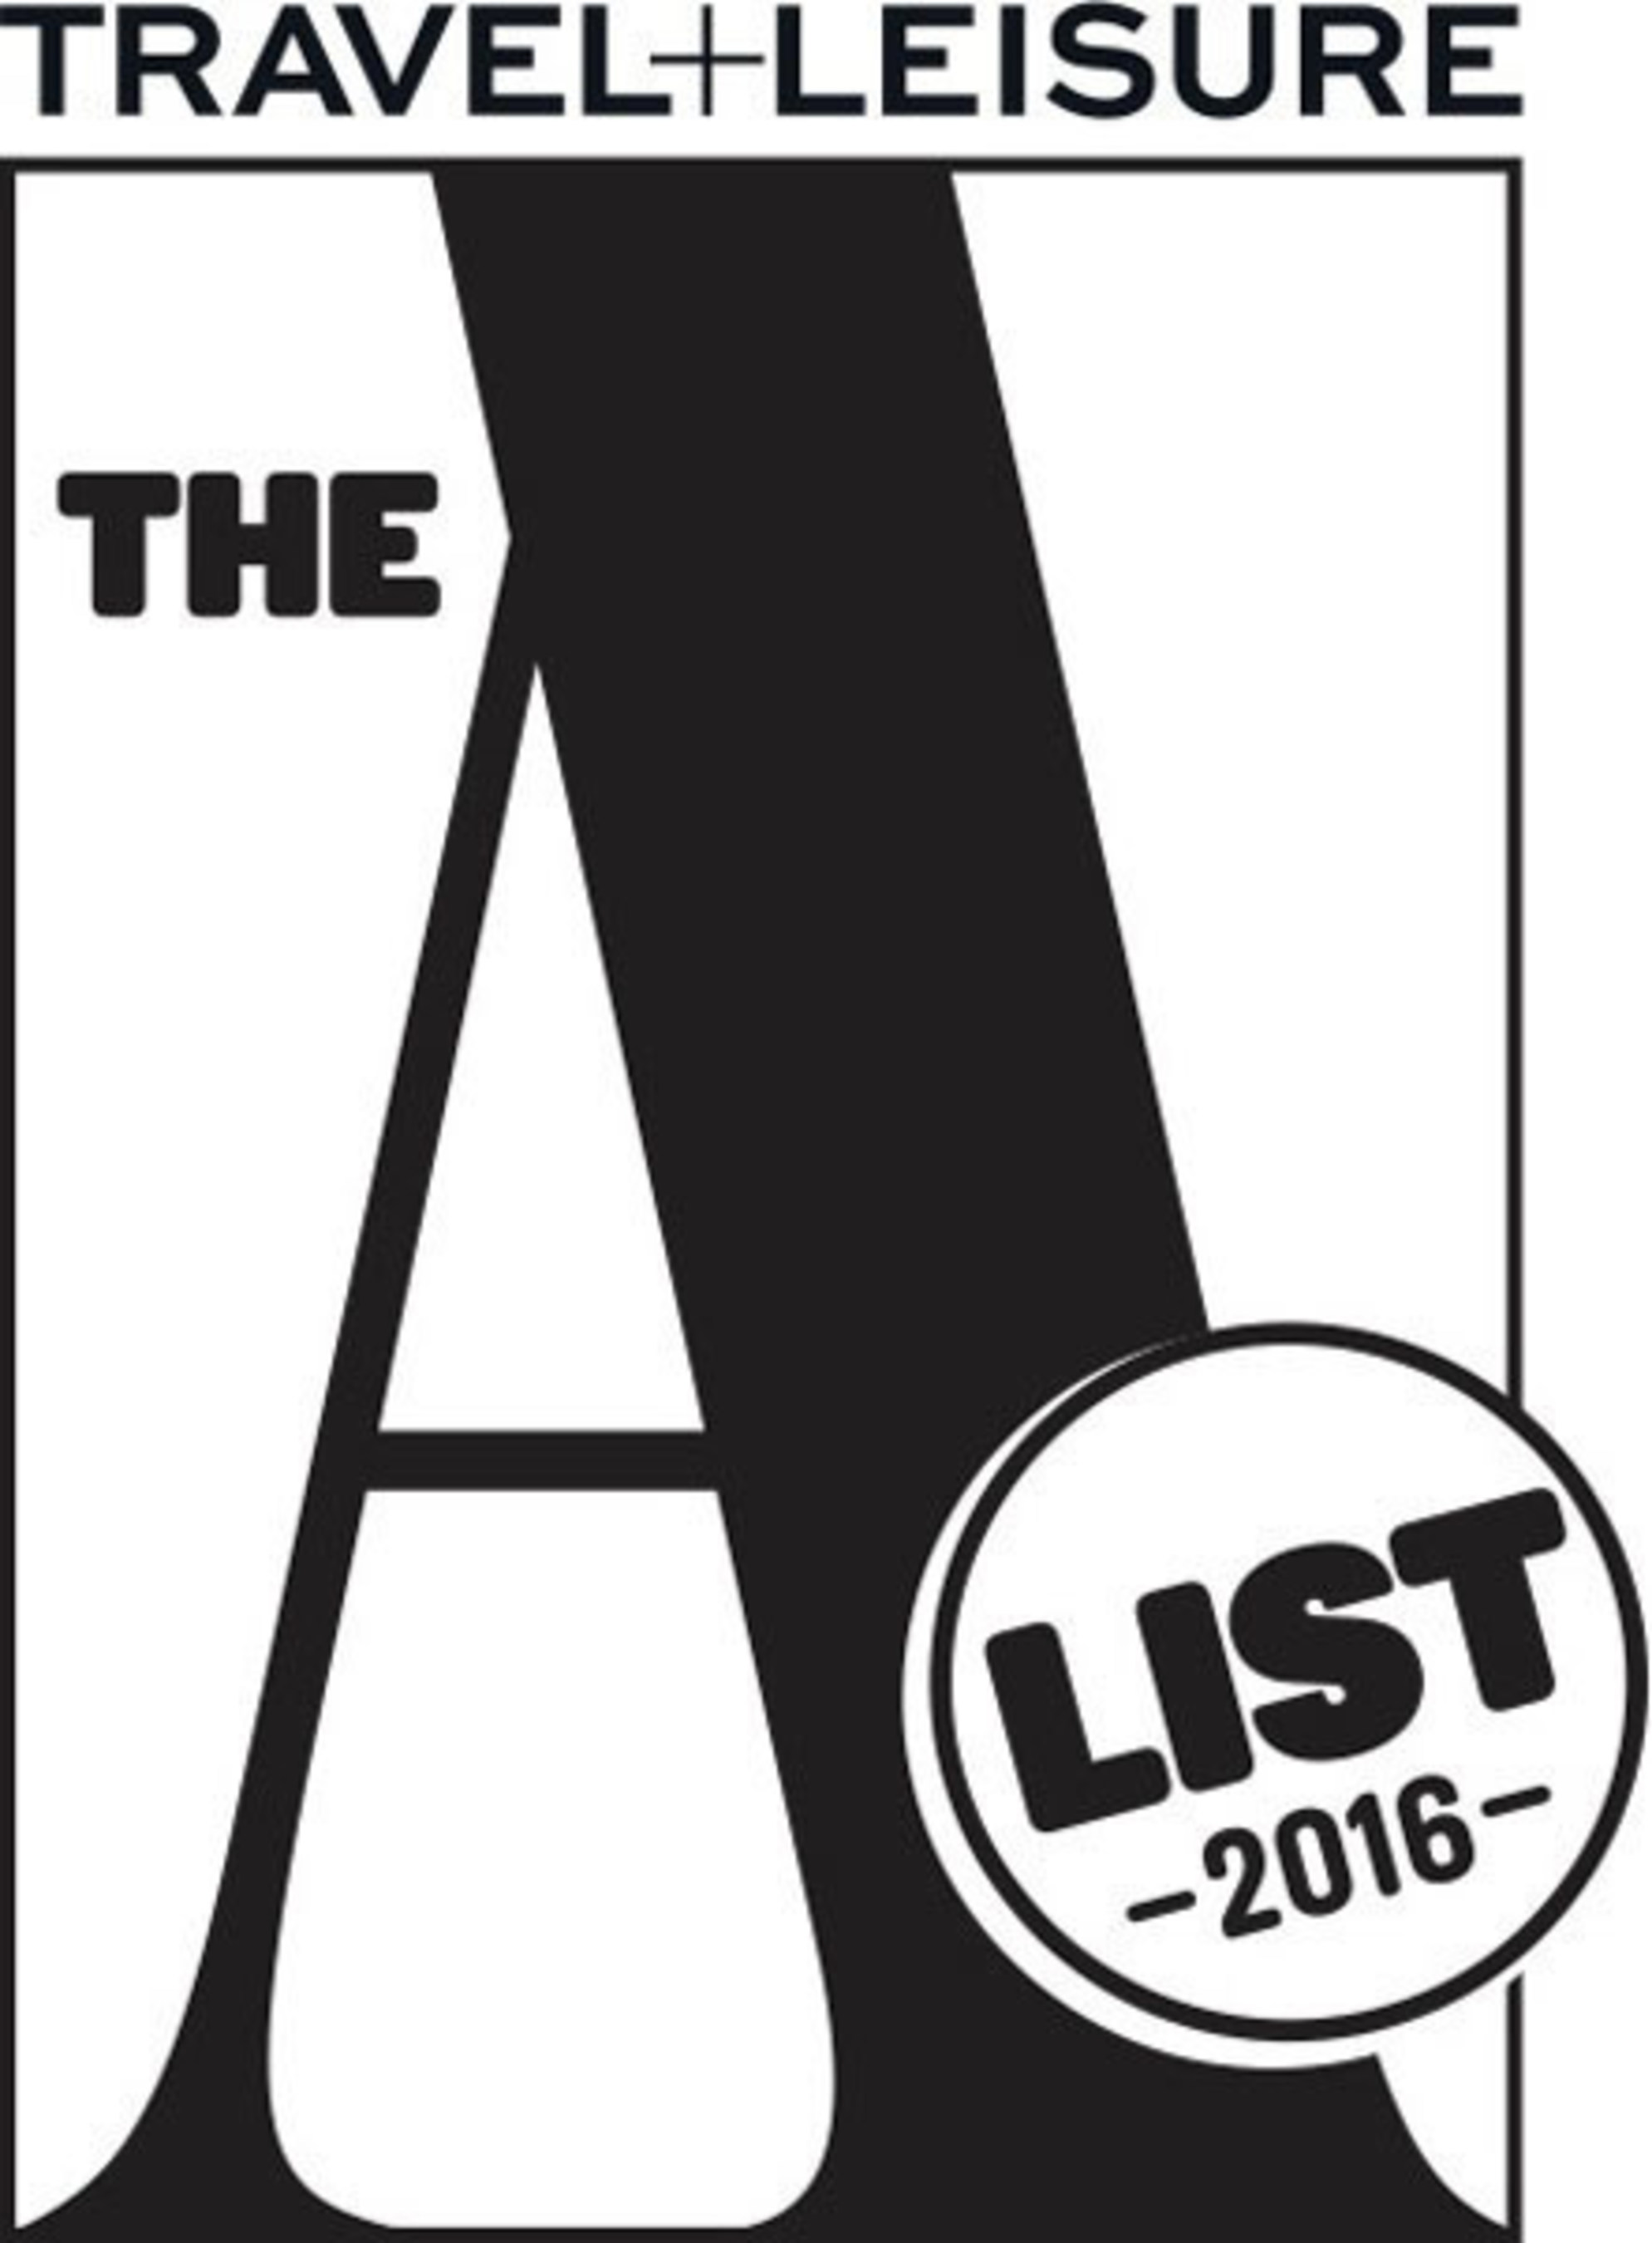 Travel + Leisure A-List for 2016